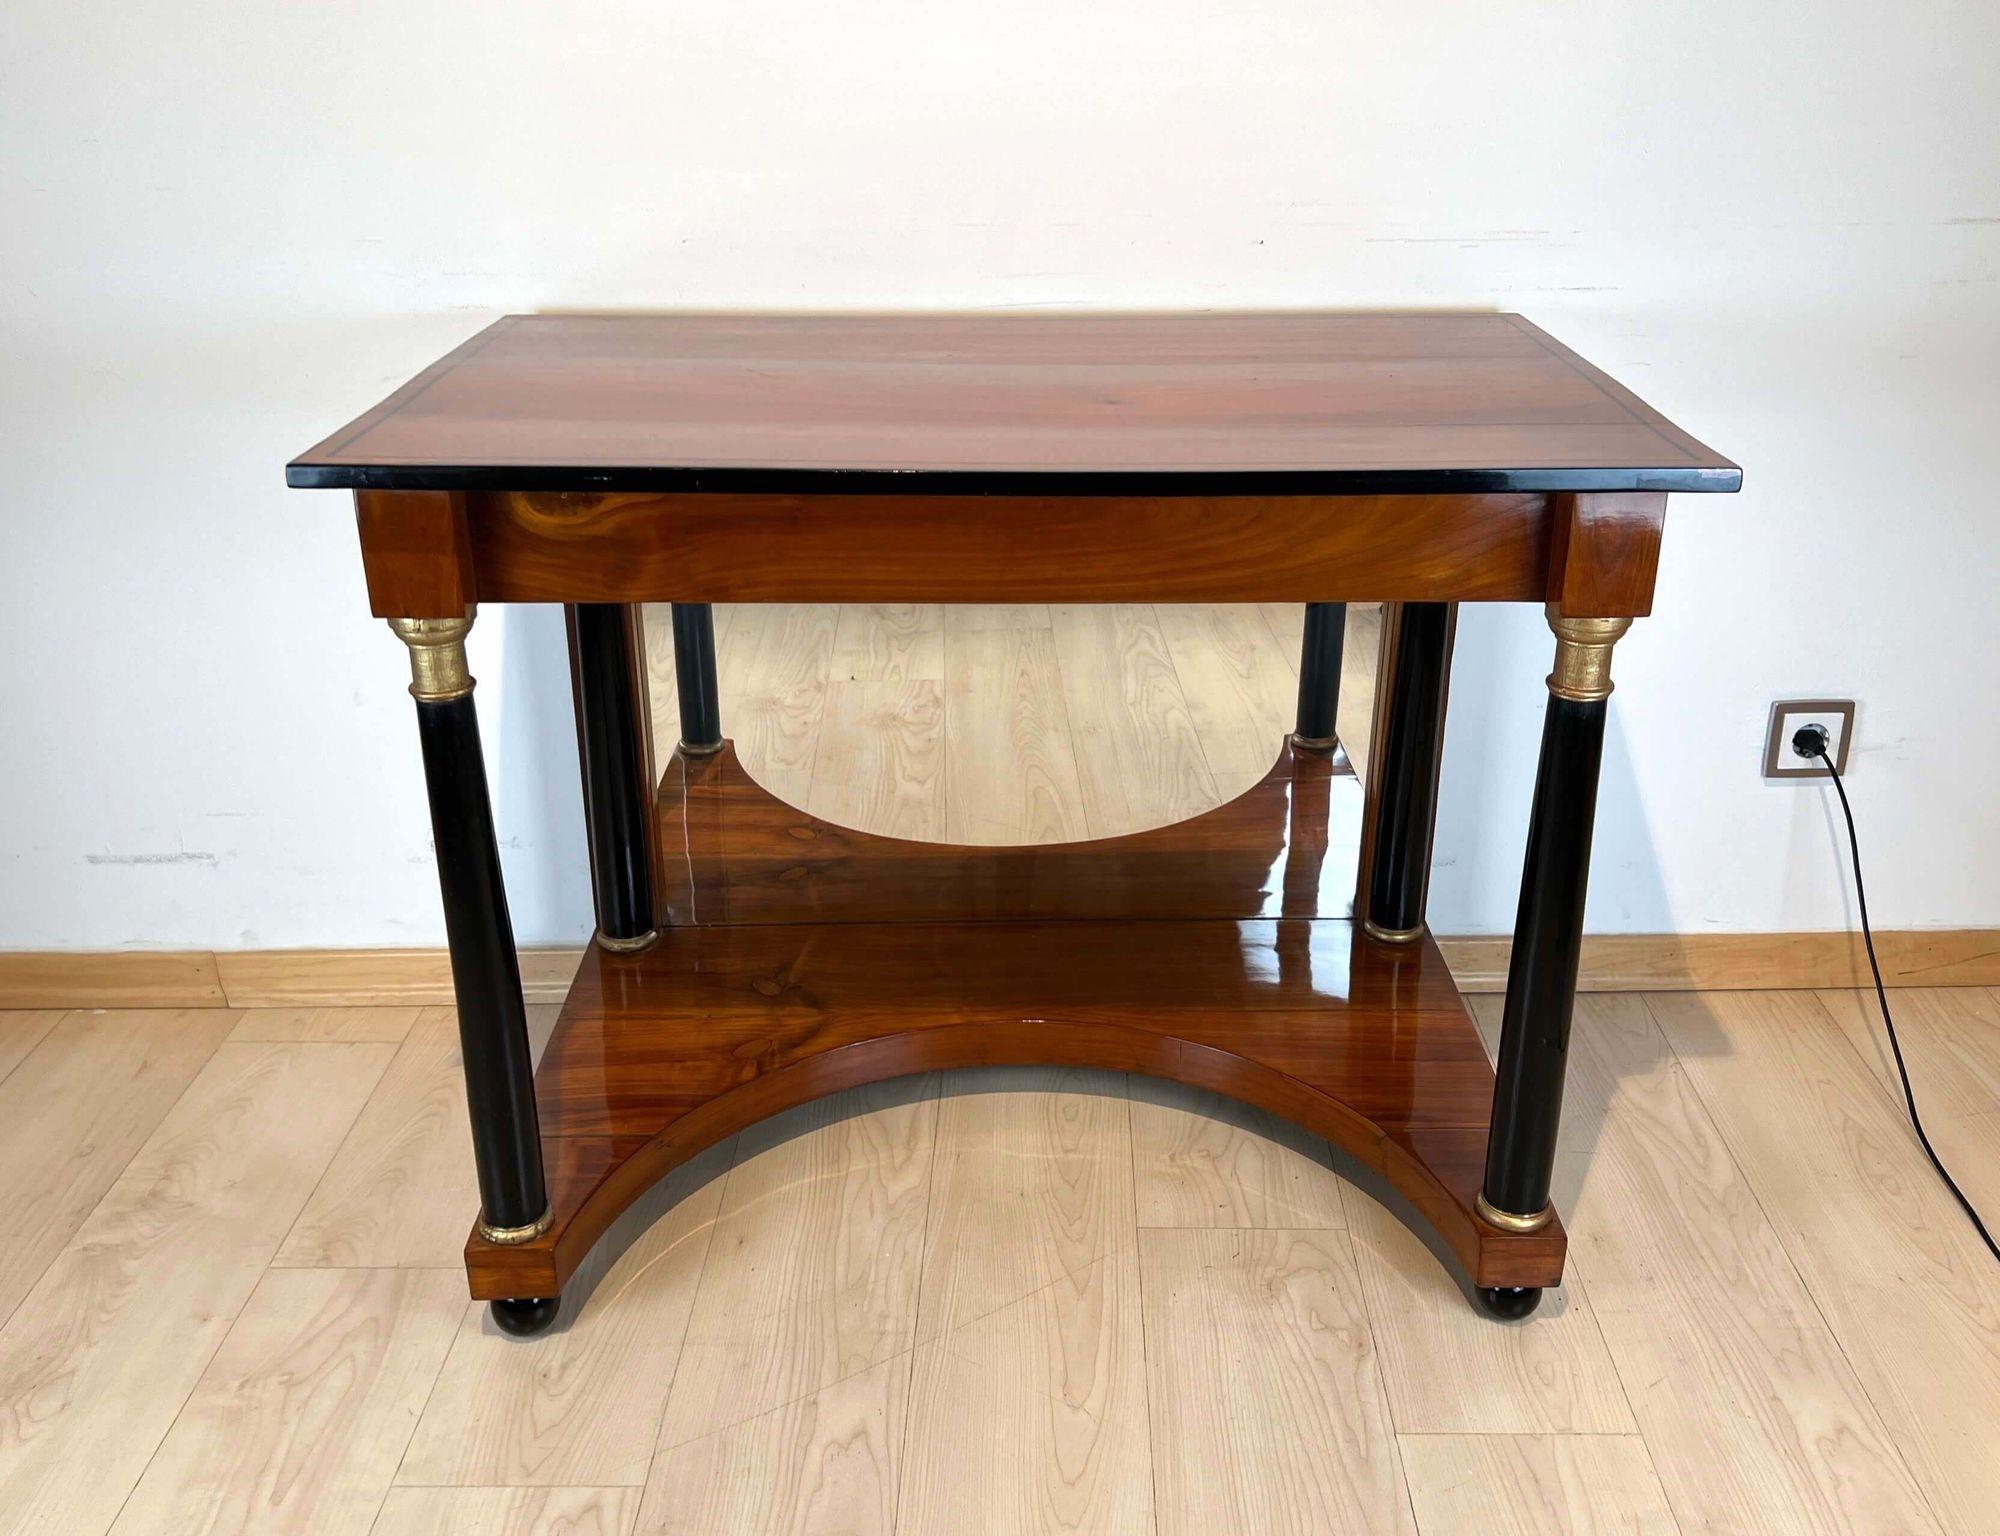 Biedermeier Console Table, Cherry Wood, Full Columns, South Germany circa 1820 For Sale 8